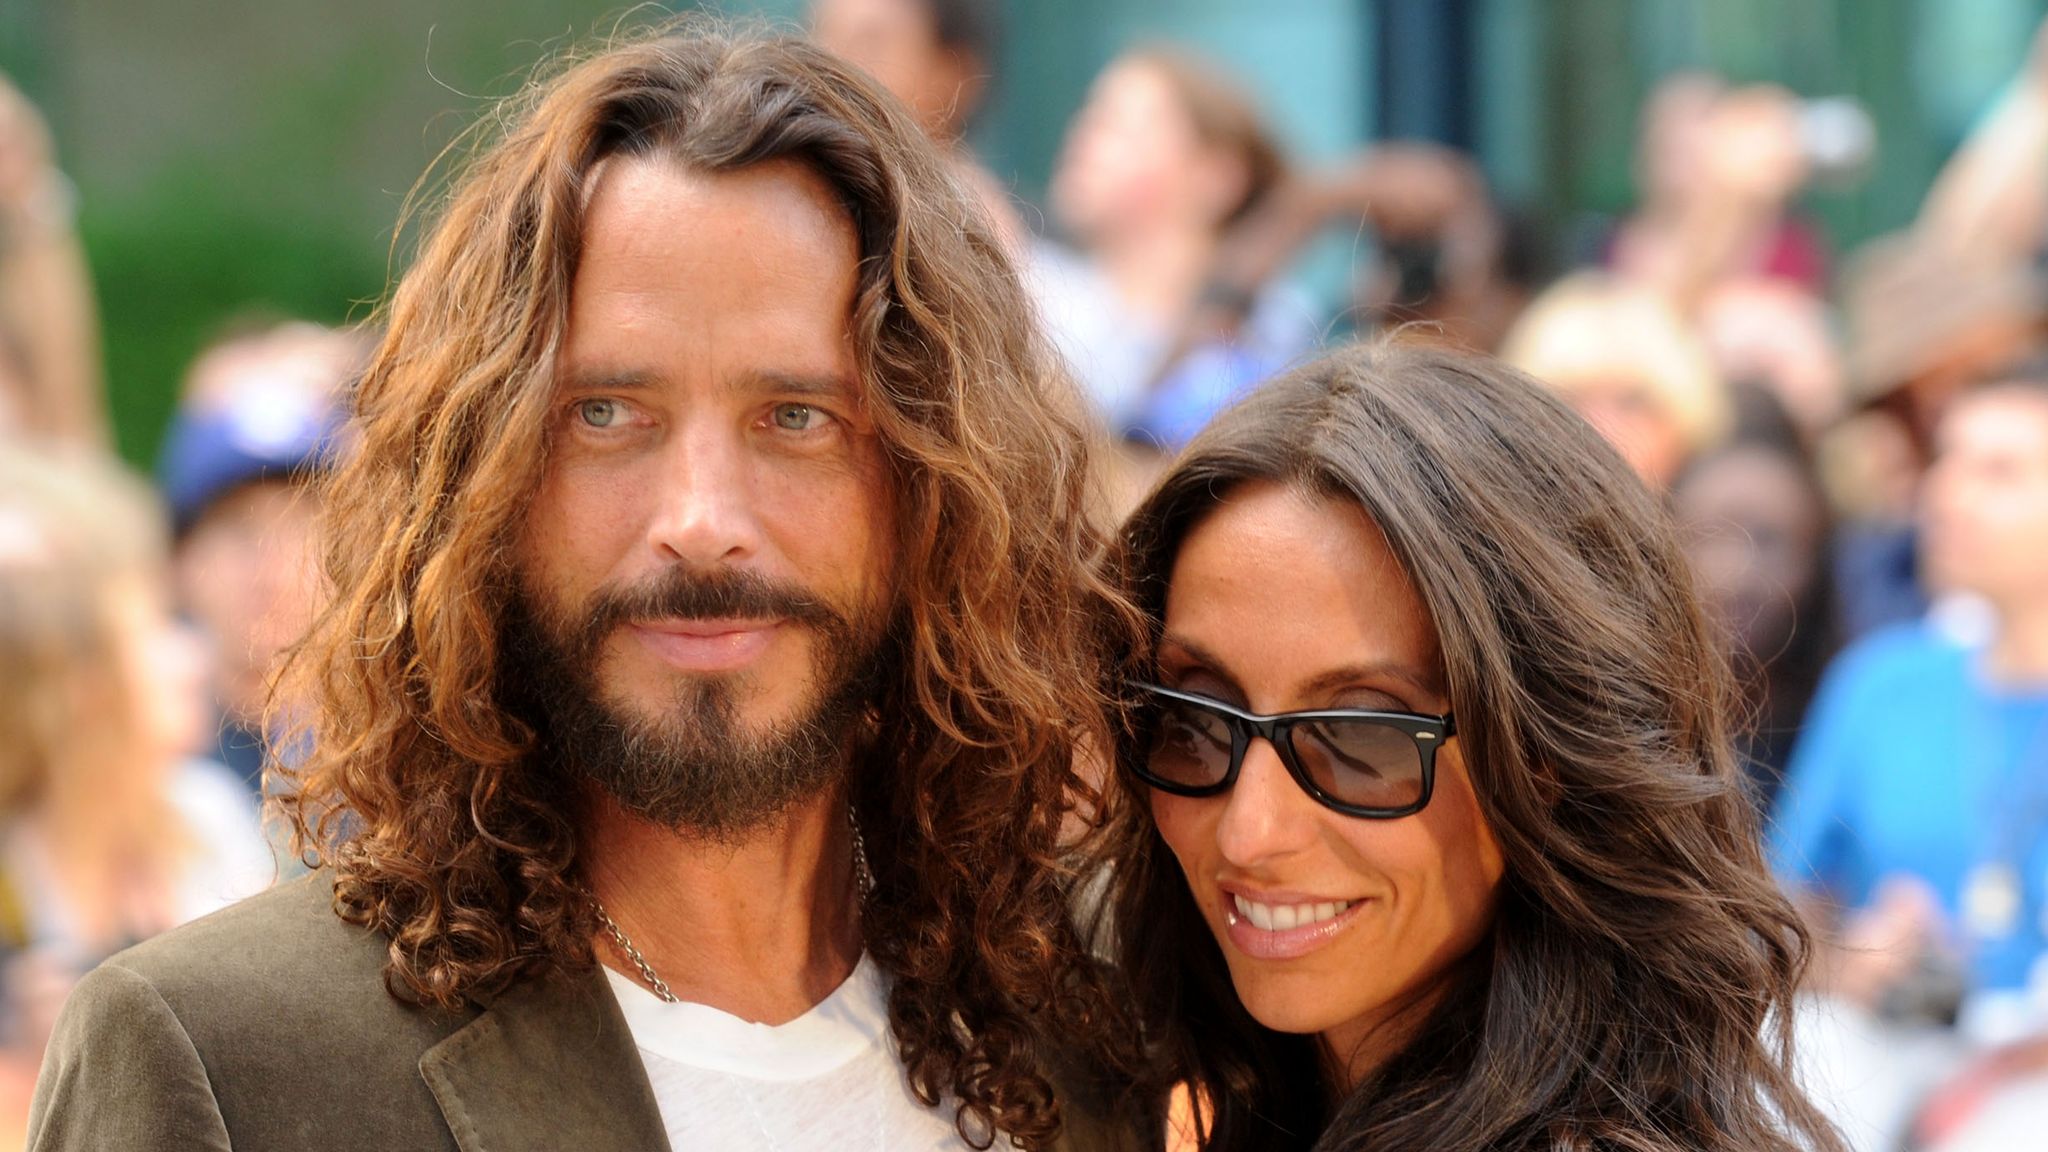 Chris Cornell S Widow Sues Soundgarden Over Royalties And Unreleased Songs Ents Arts News Sky News